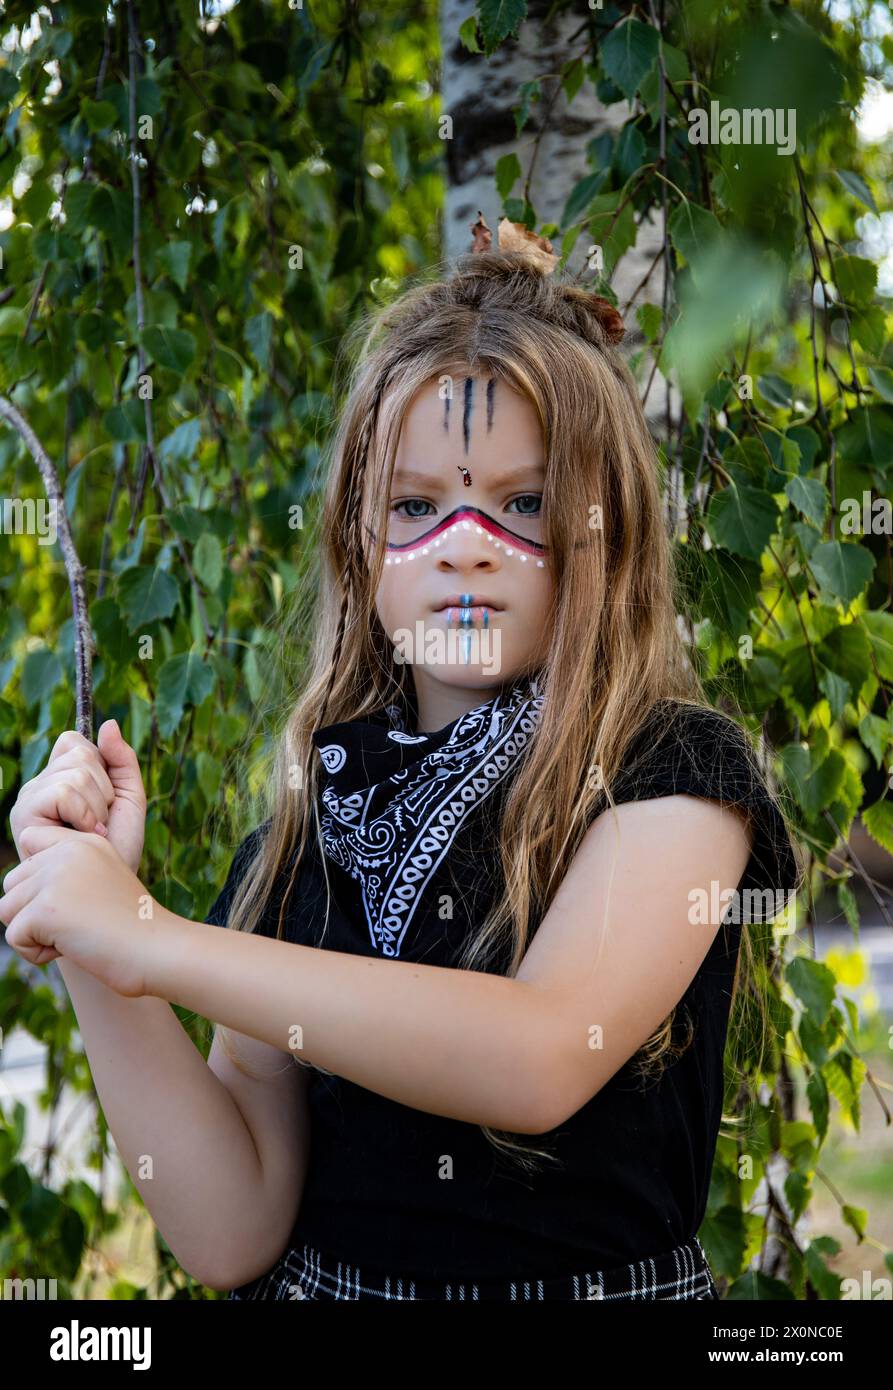 Tribe girl with long hair and traditional makeup dress up school day child holding a stick in the woods Stock Photo